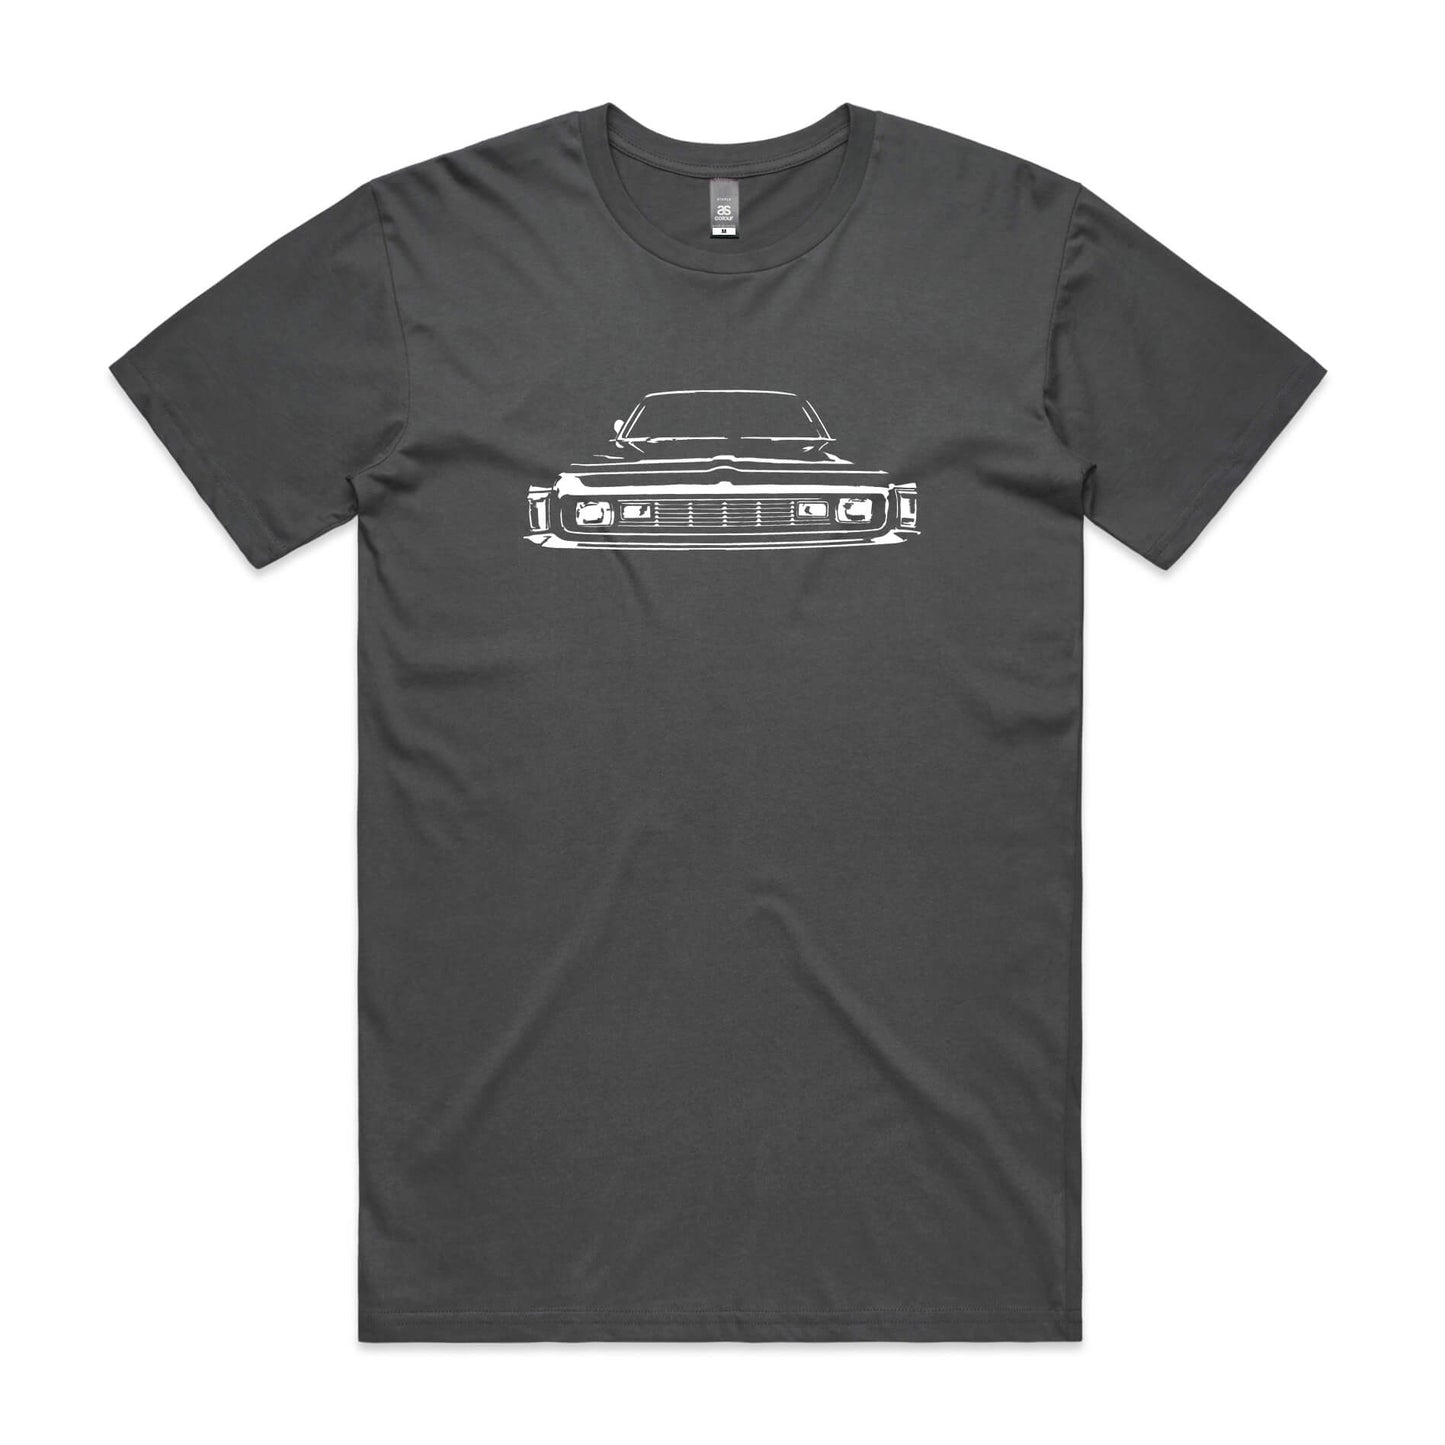 Chrysler Valiant VH Charger t-shirt in charcoal grey